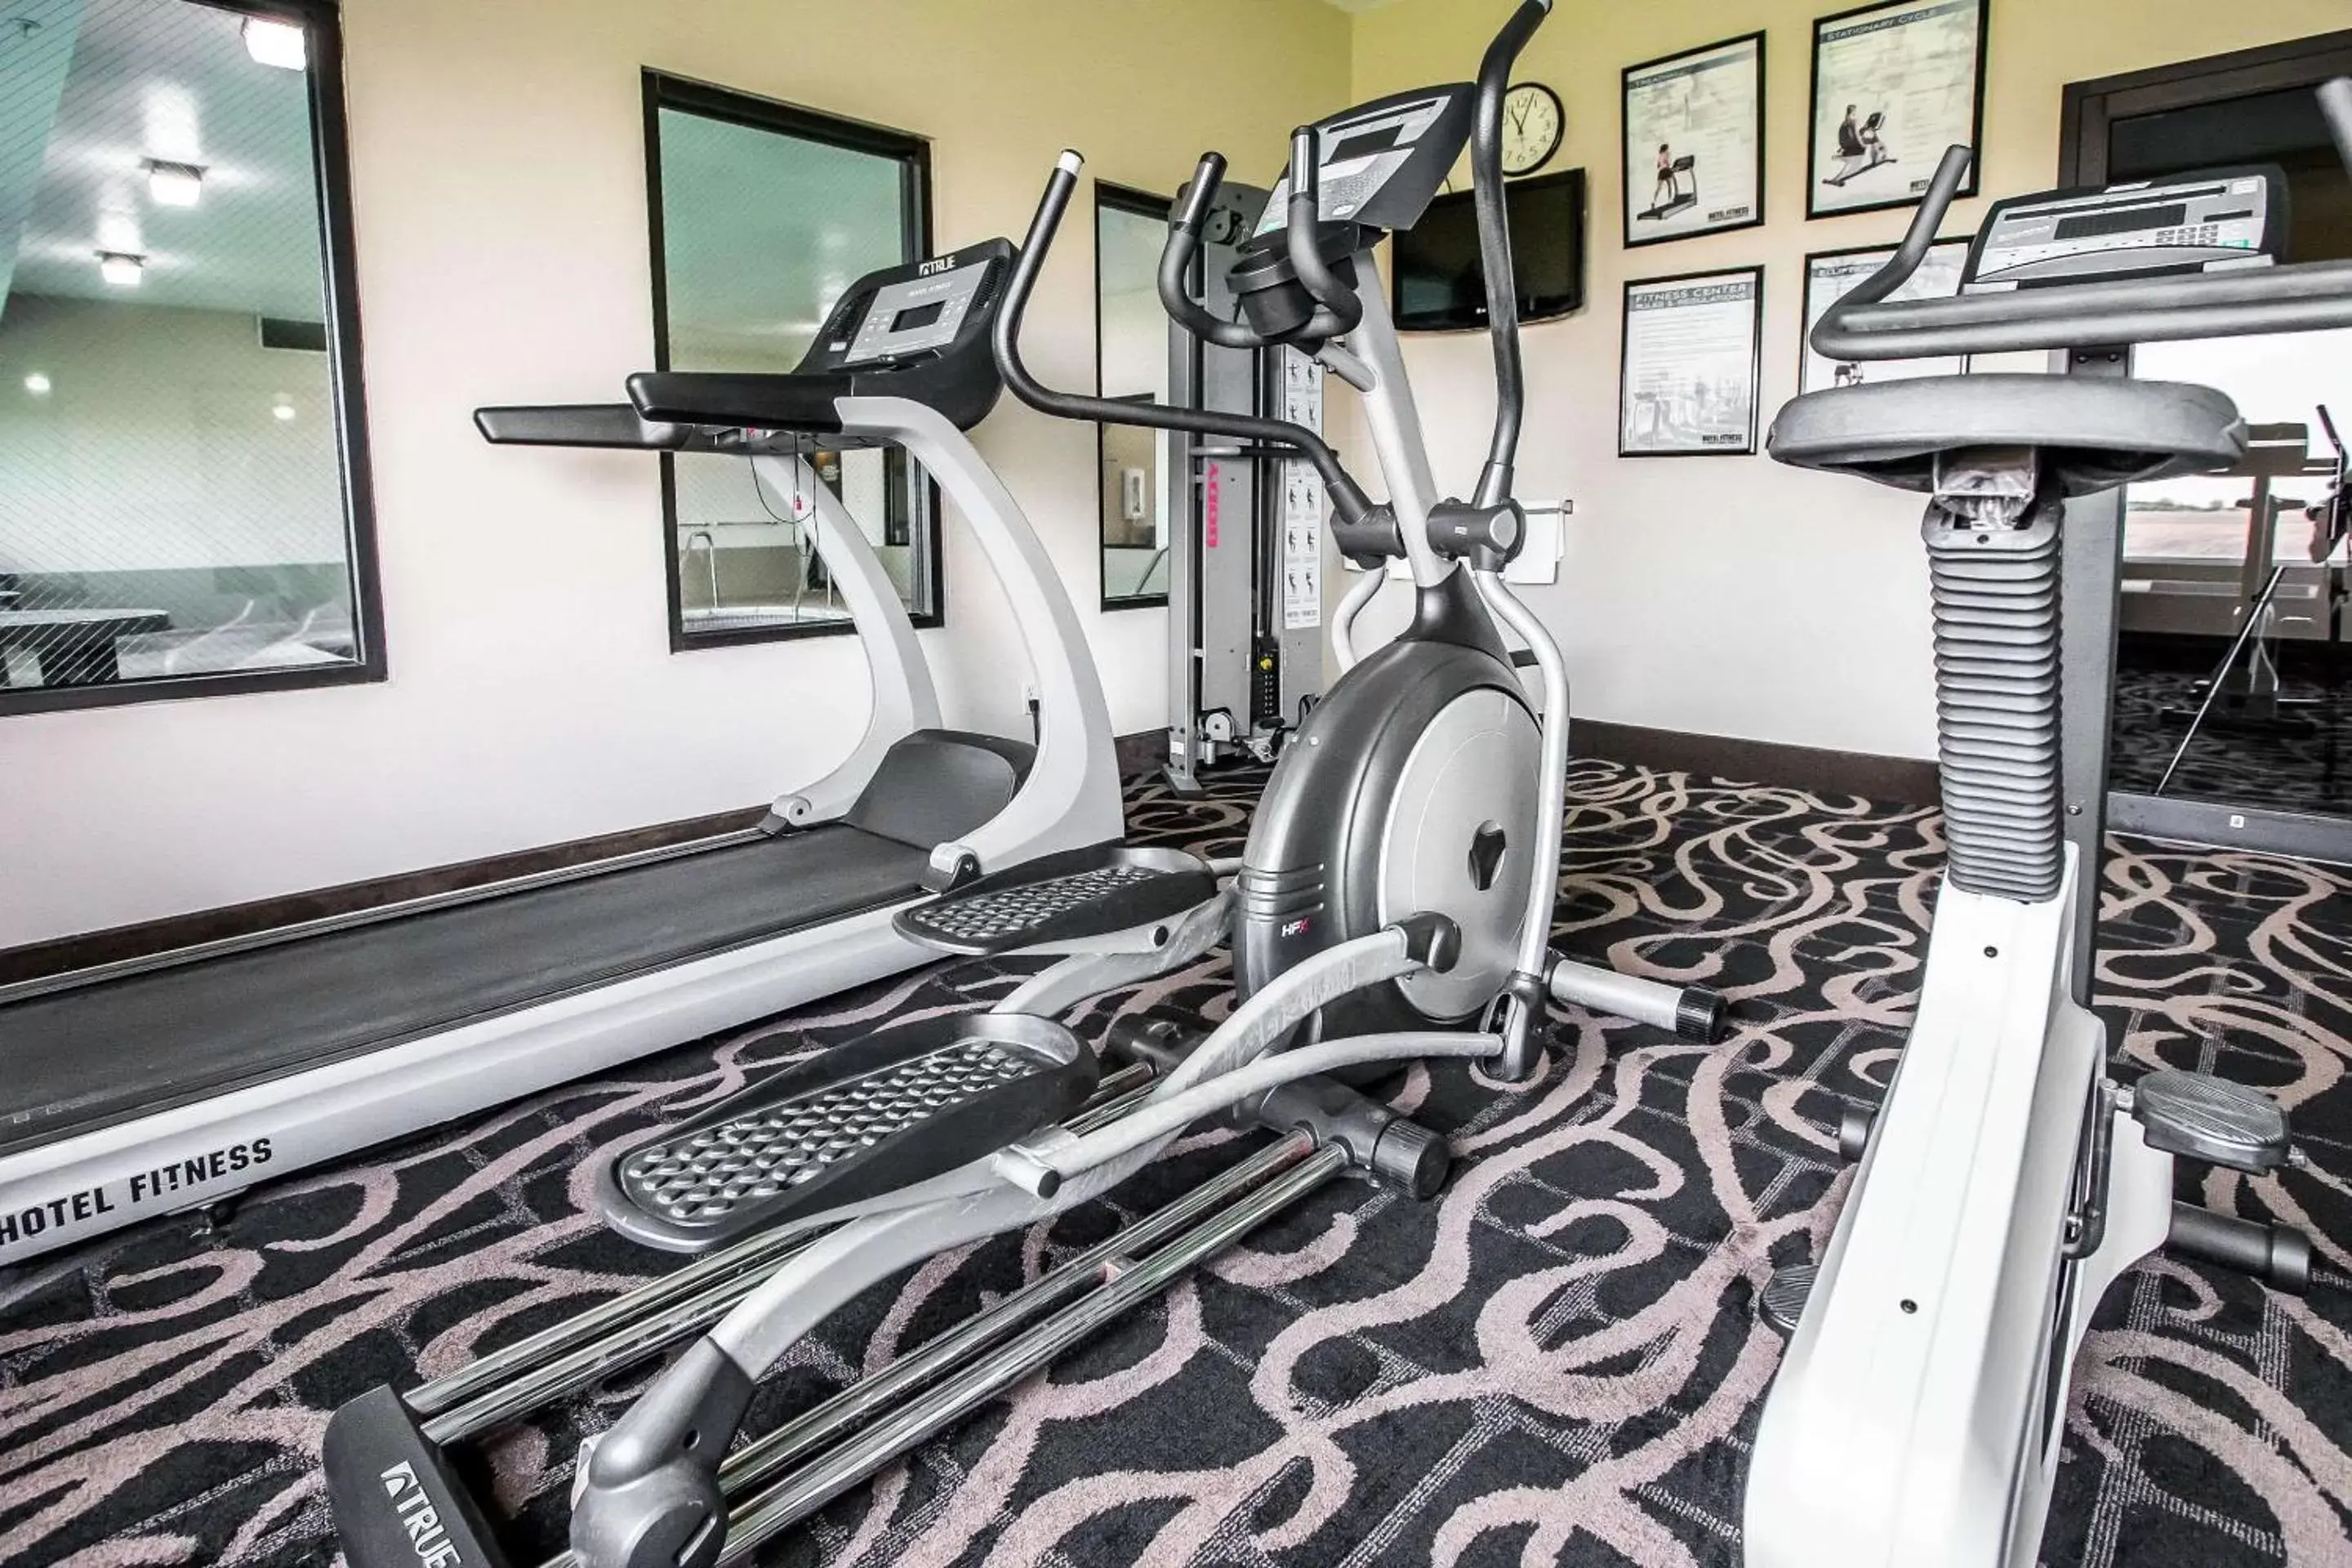 Fitness centre/facilities, Fitness Center/Facilities in Quality Inn & Suites Mendota near I-39